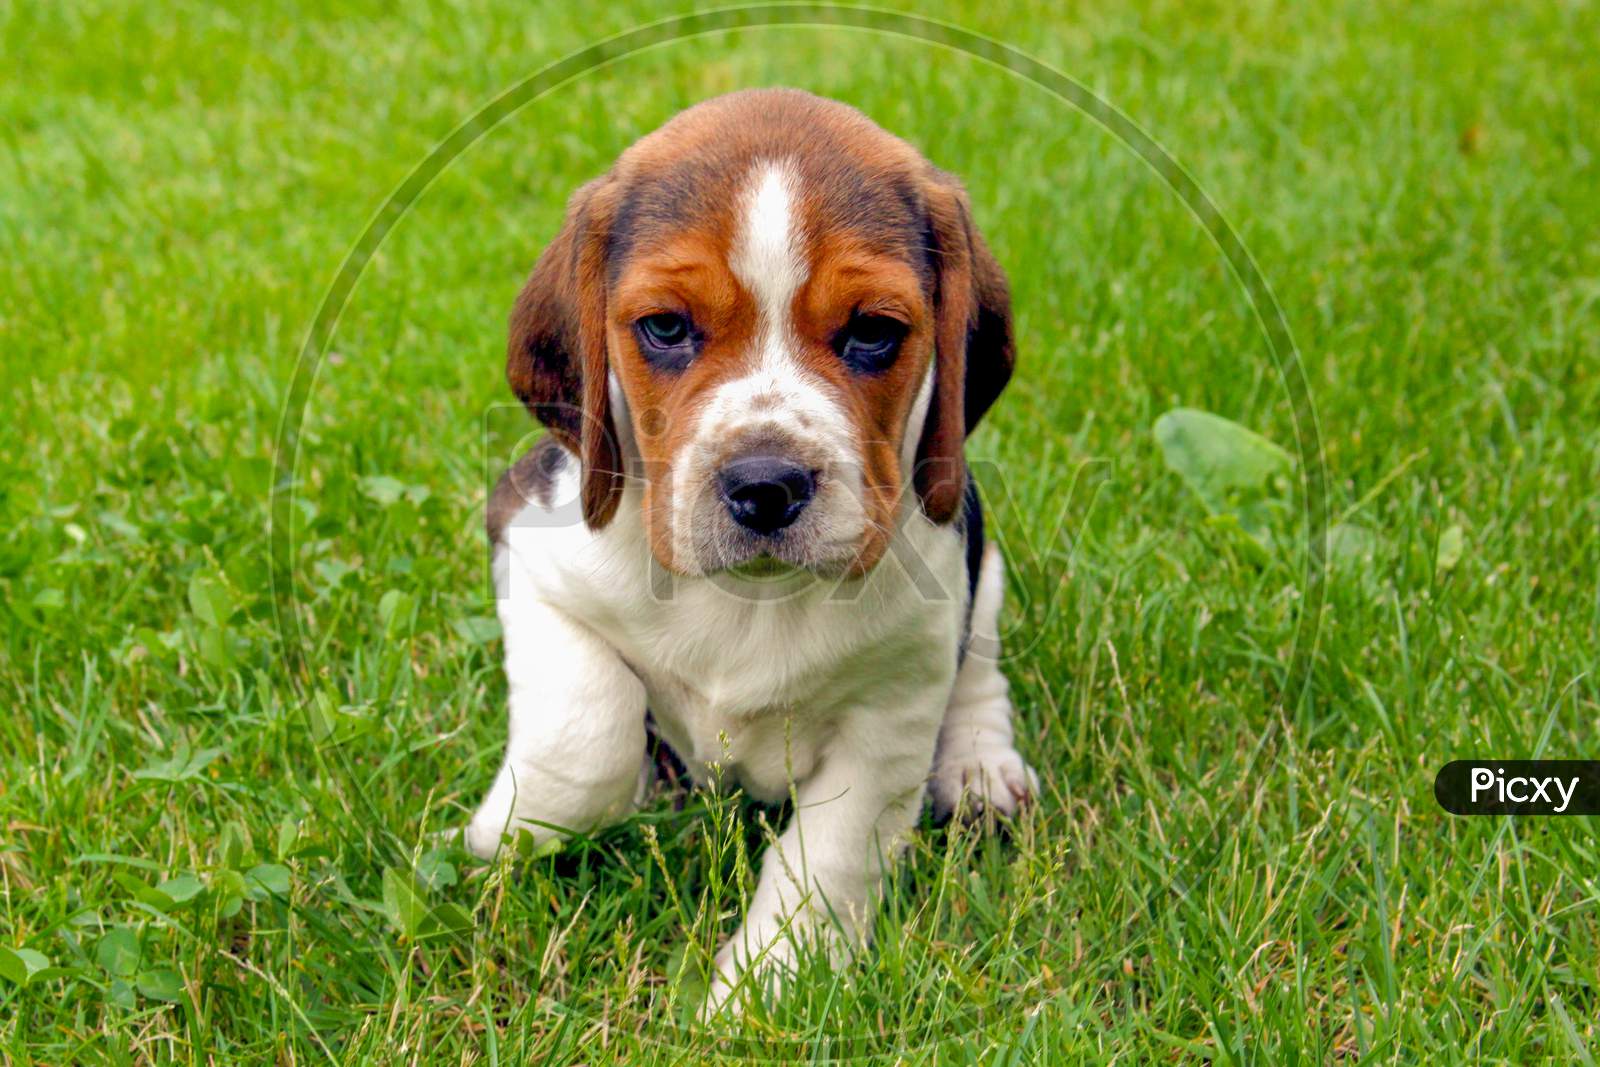 Beagle Puppy Dog In Green Grass Isolated